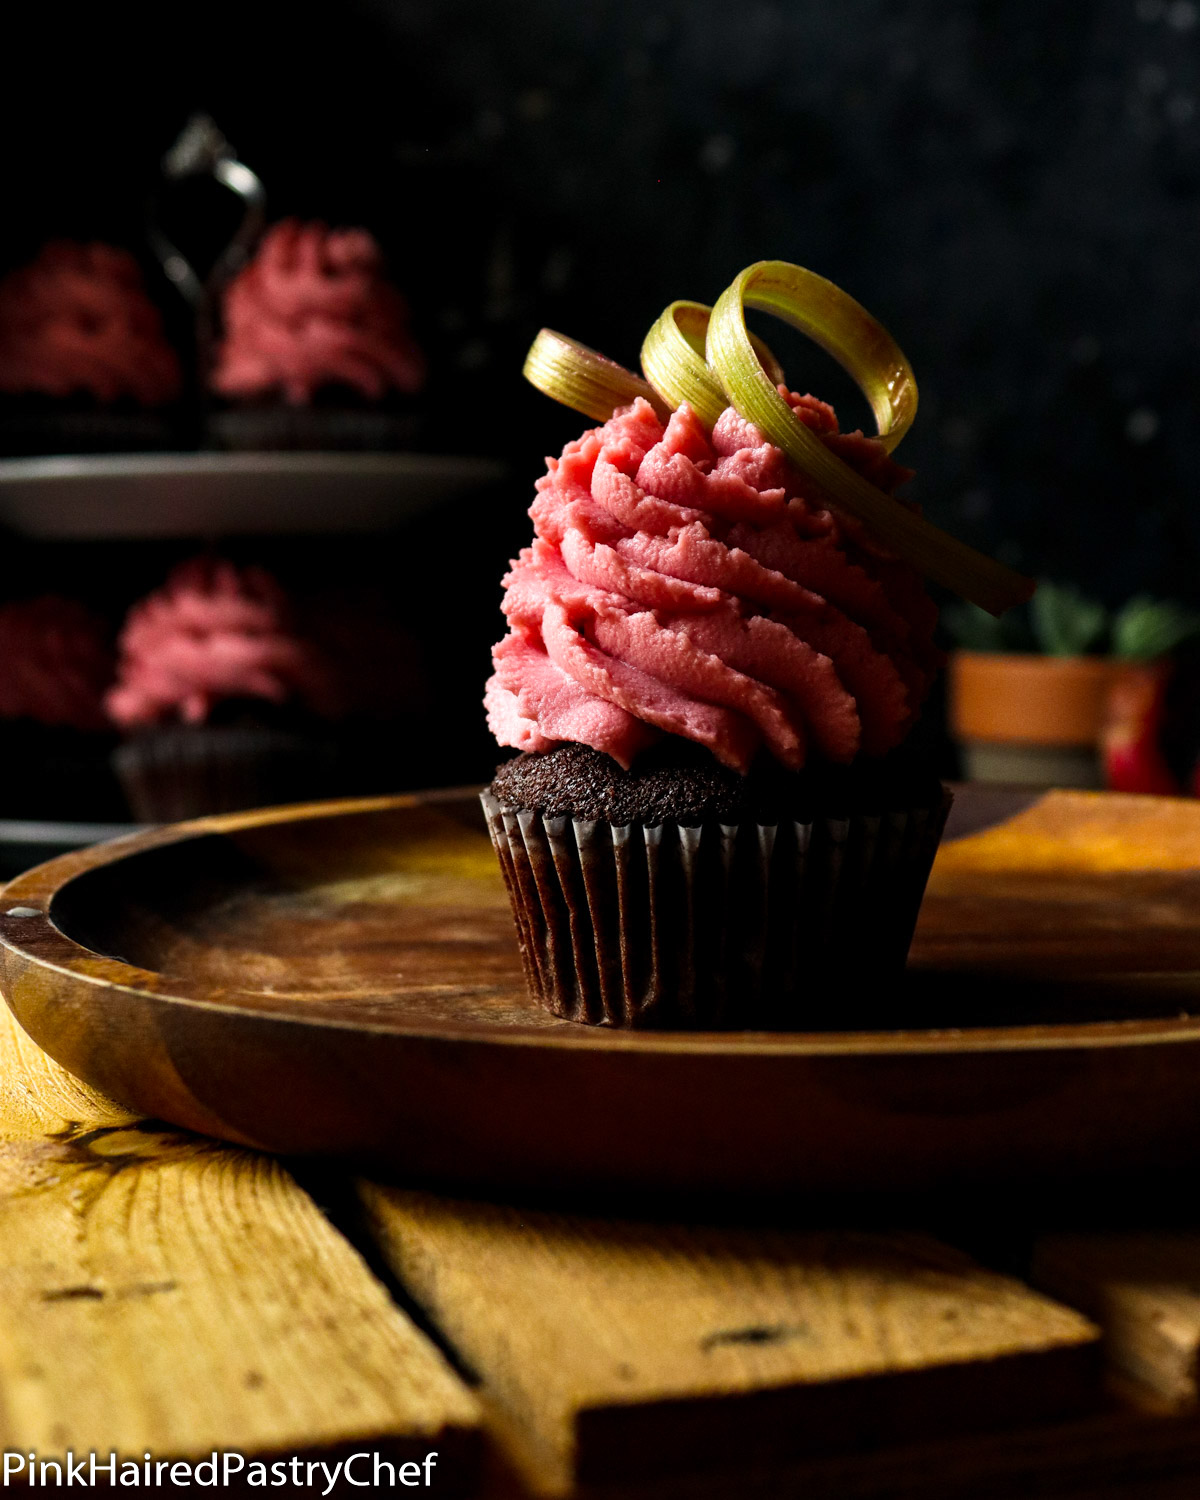 Chocolate Cupcake on a wooden plate on top of a wooden board. Hot Pink Rhubarb Whipped Ganache piped high on top with star nozzle. Rhubarb curl garnish on top.